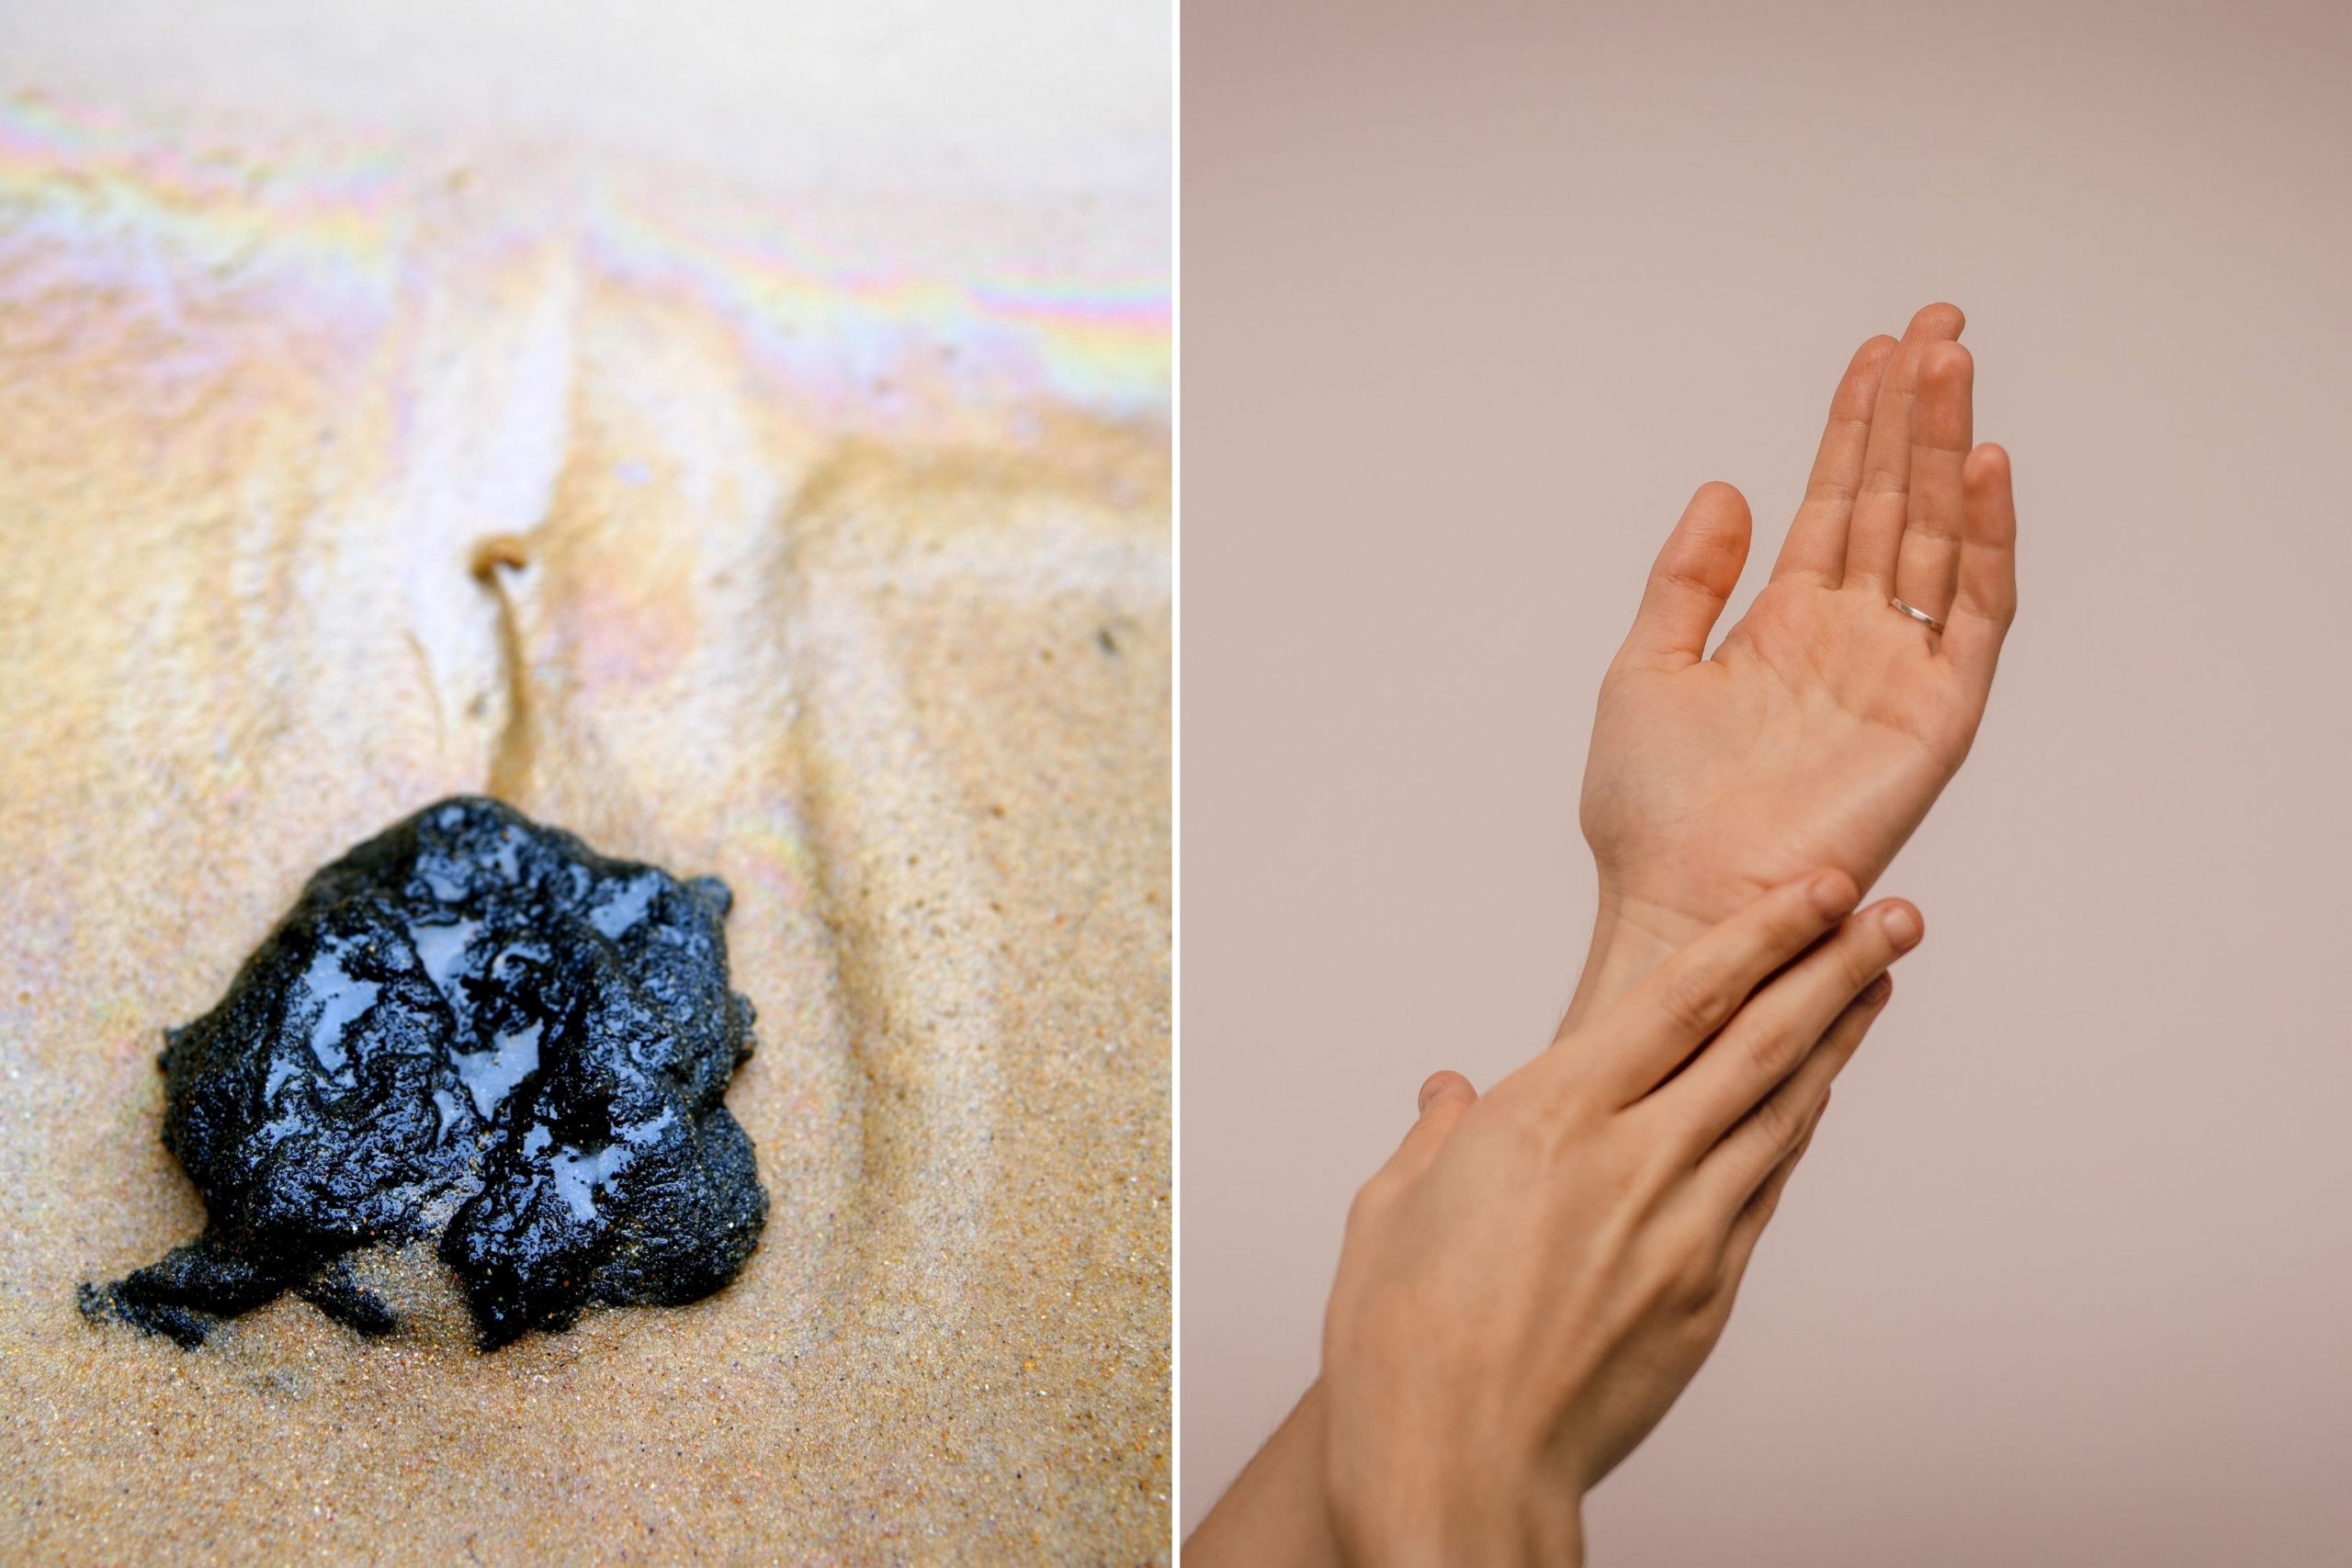 How to Get Black Tar Off Your Skin Using Household Products